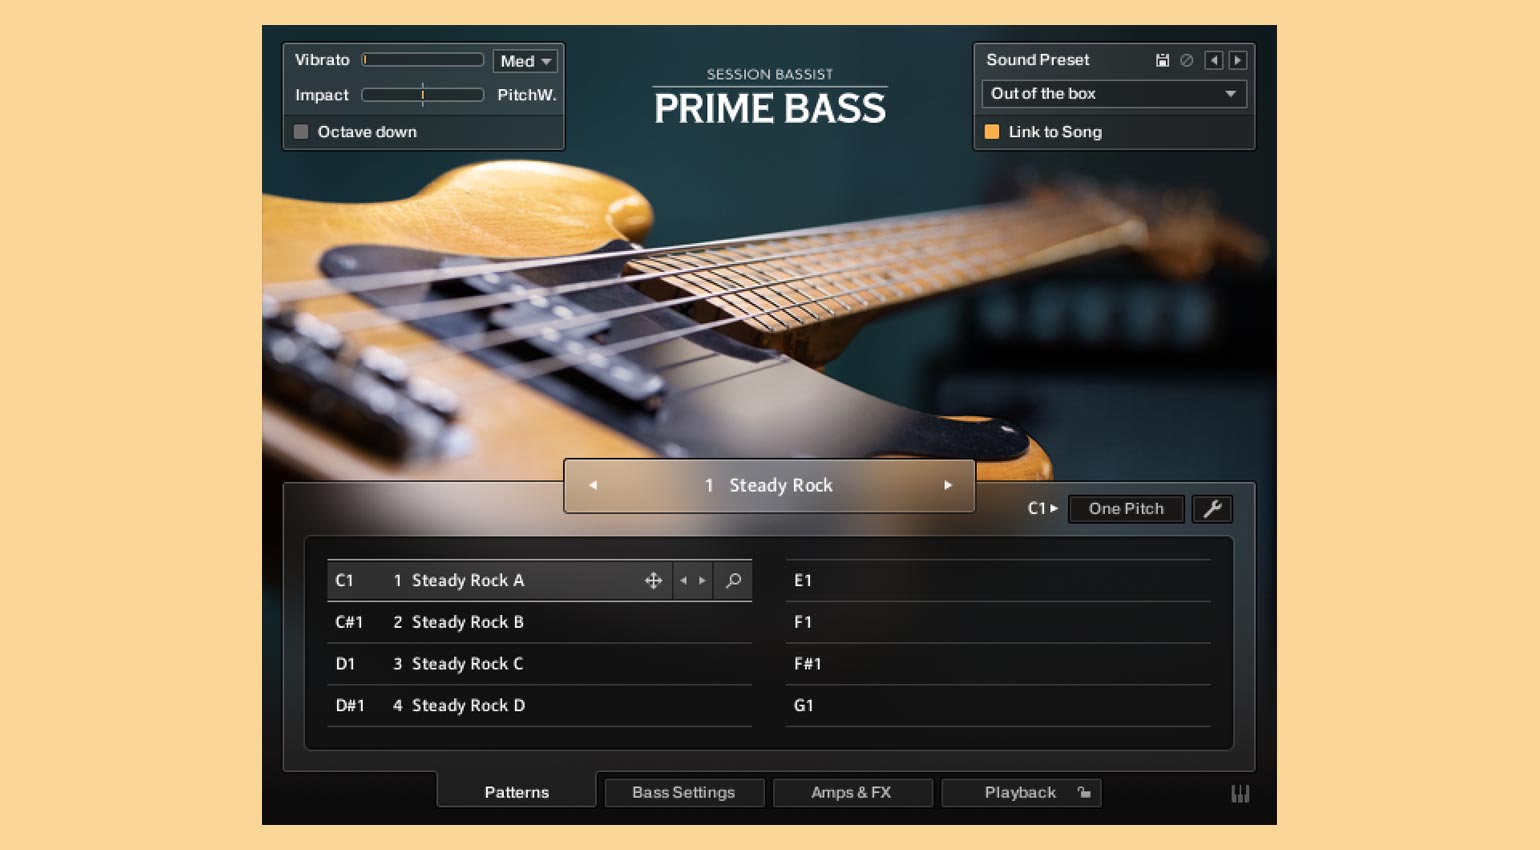 Native Instruments Session Bassist – Prime Bass